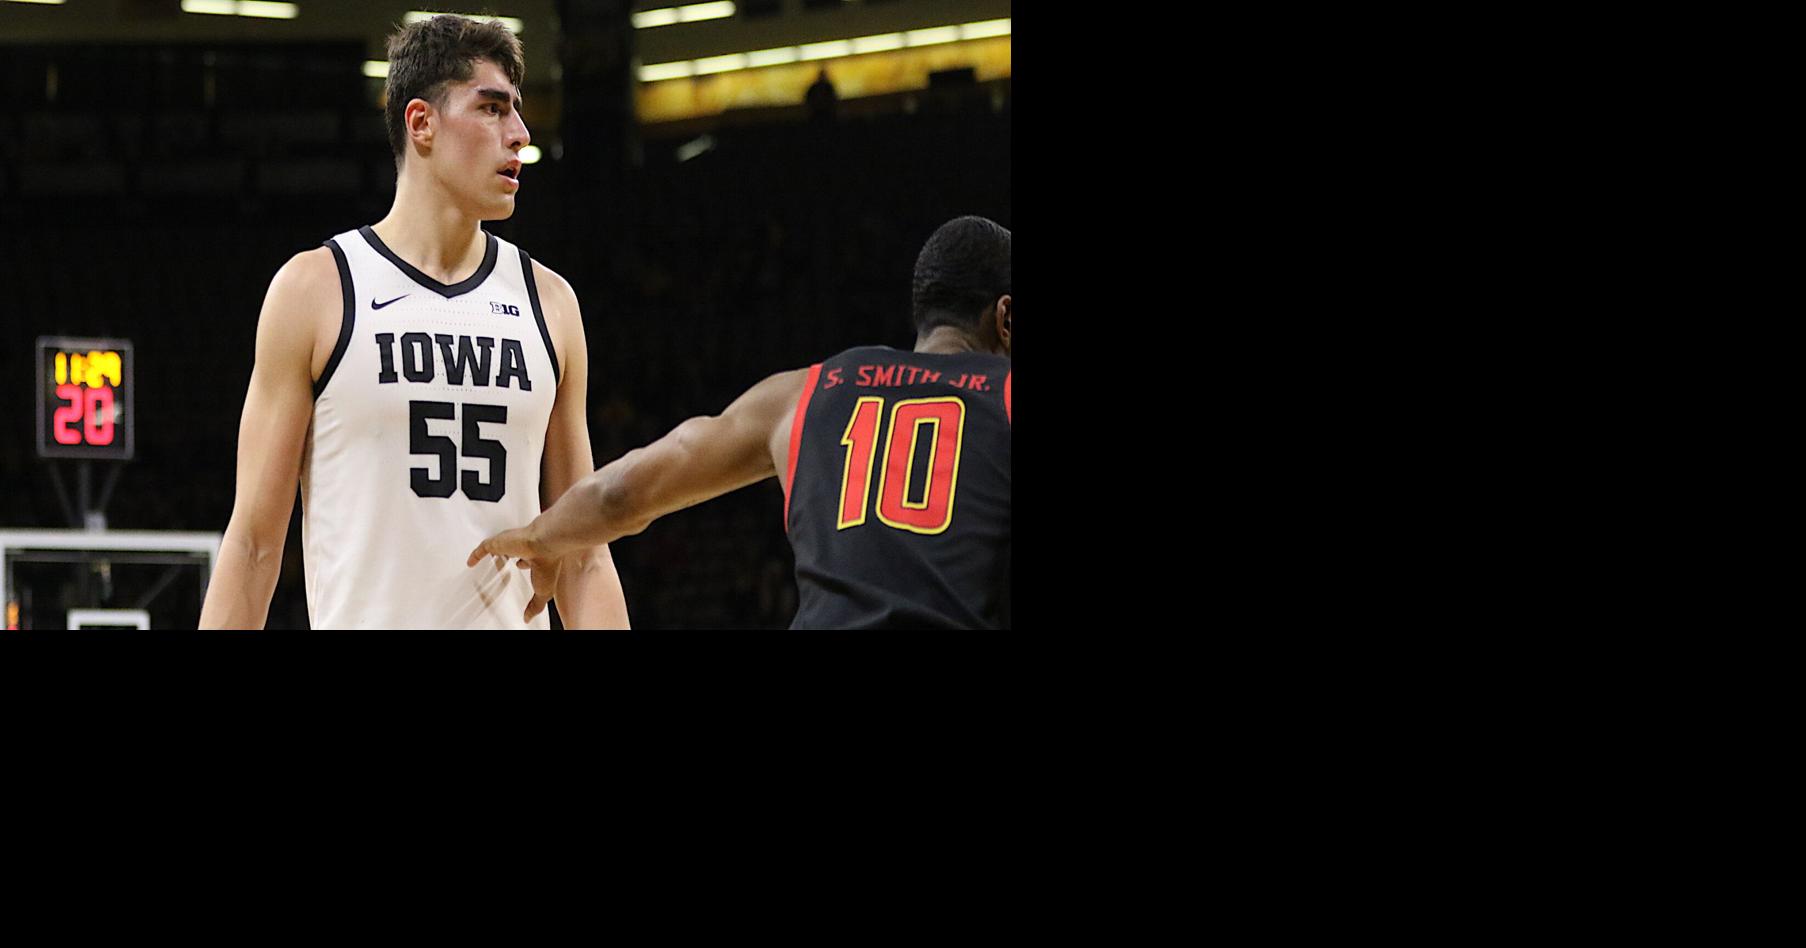 Luka Garza was a superstar for Iowa, even if he wasn't player of